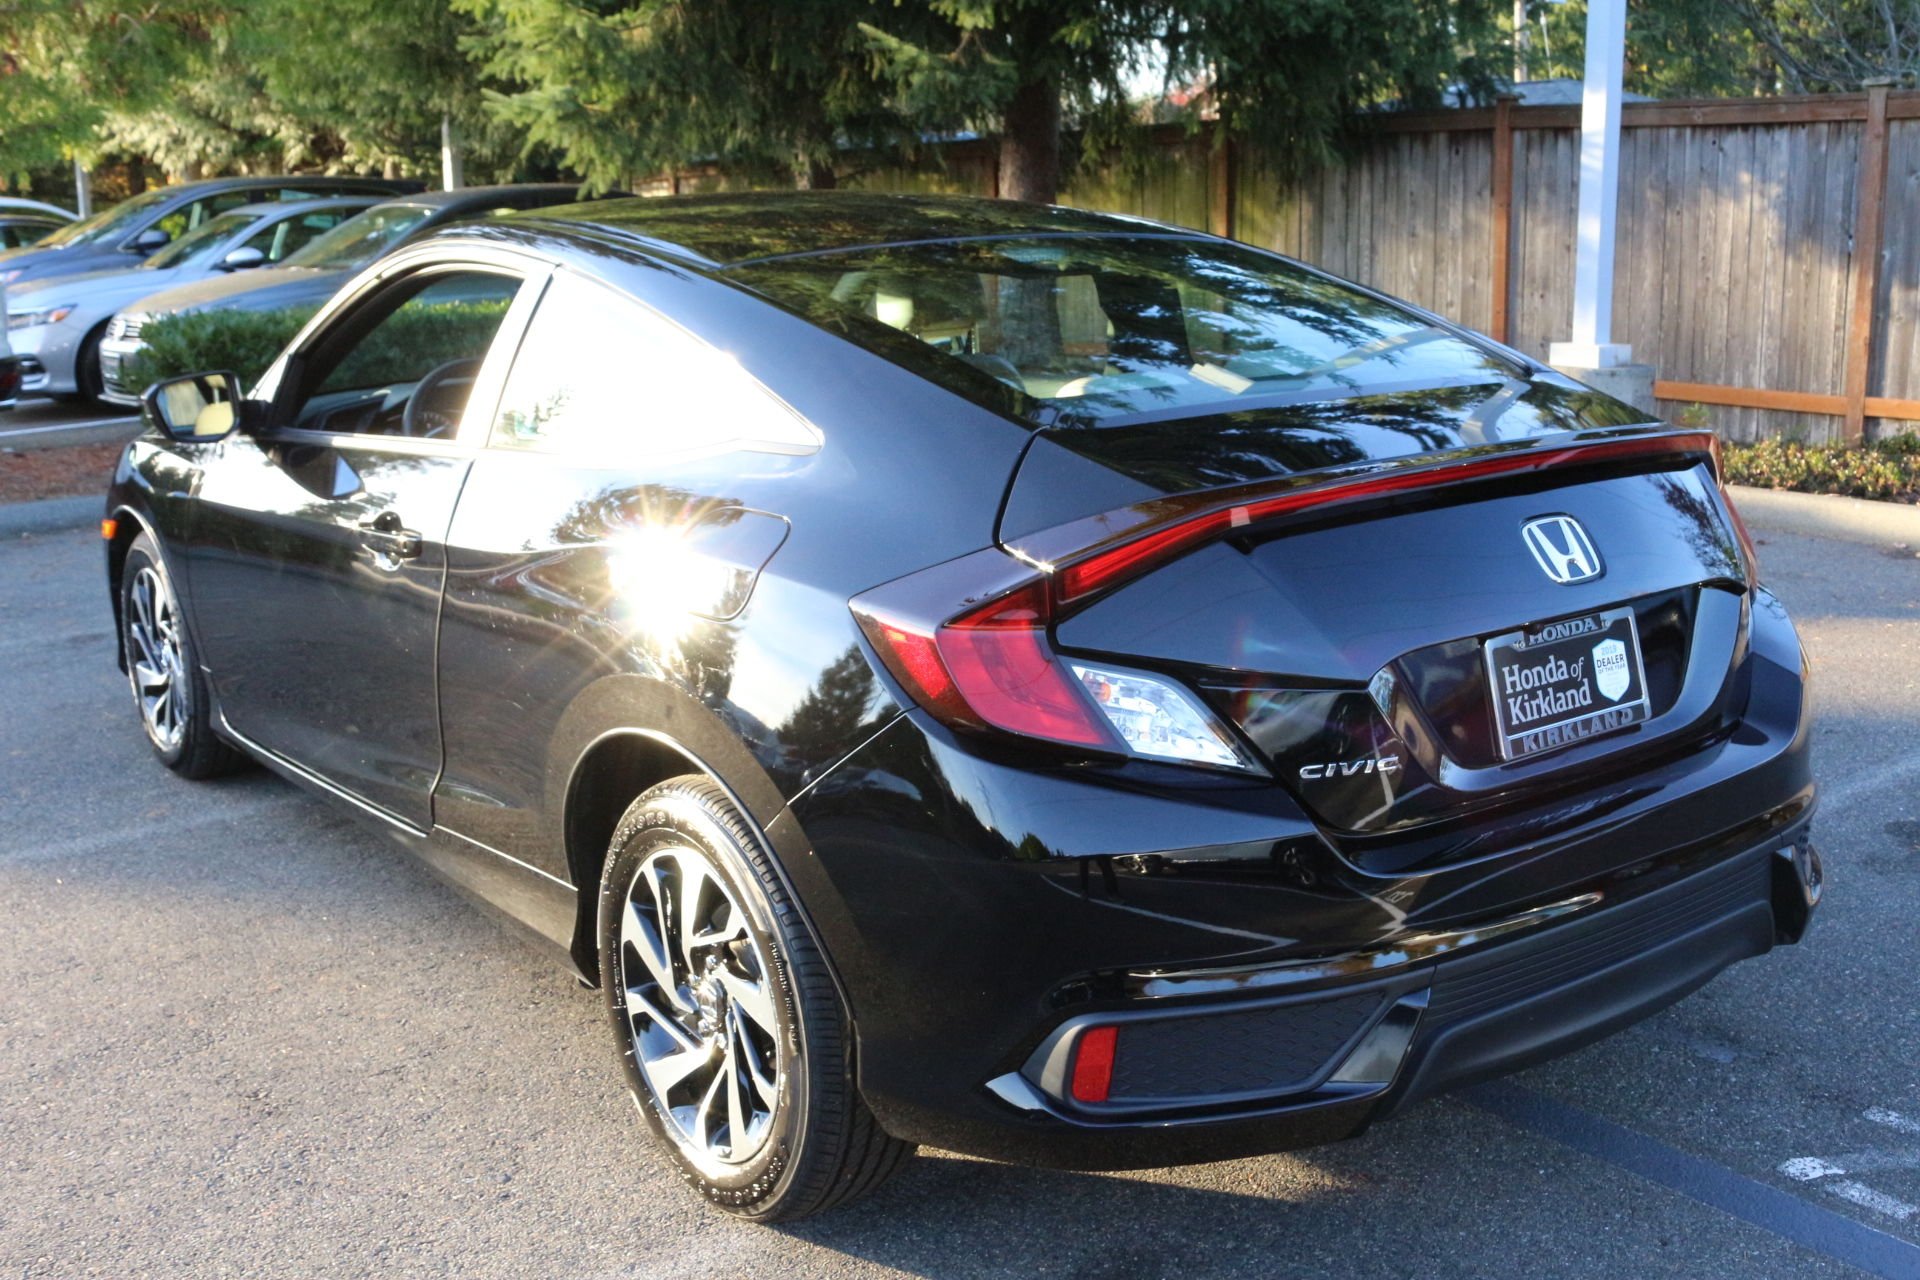 PreOwned 2016 Honda Civic Coupe LX 2dr Car in Kirkland